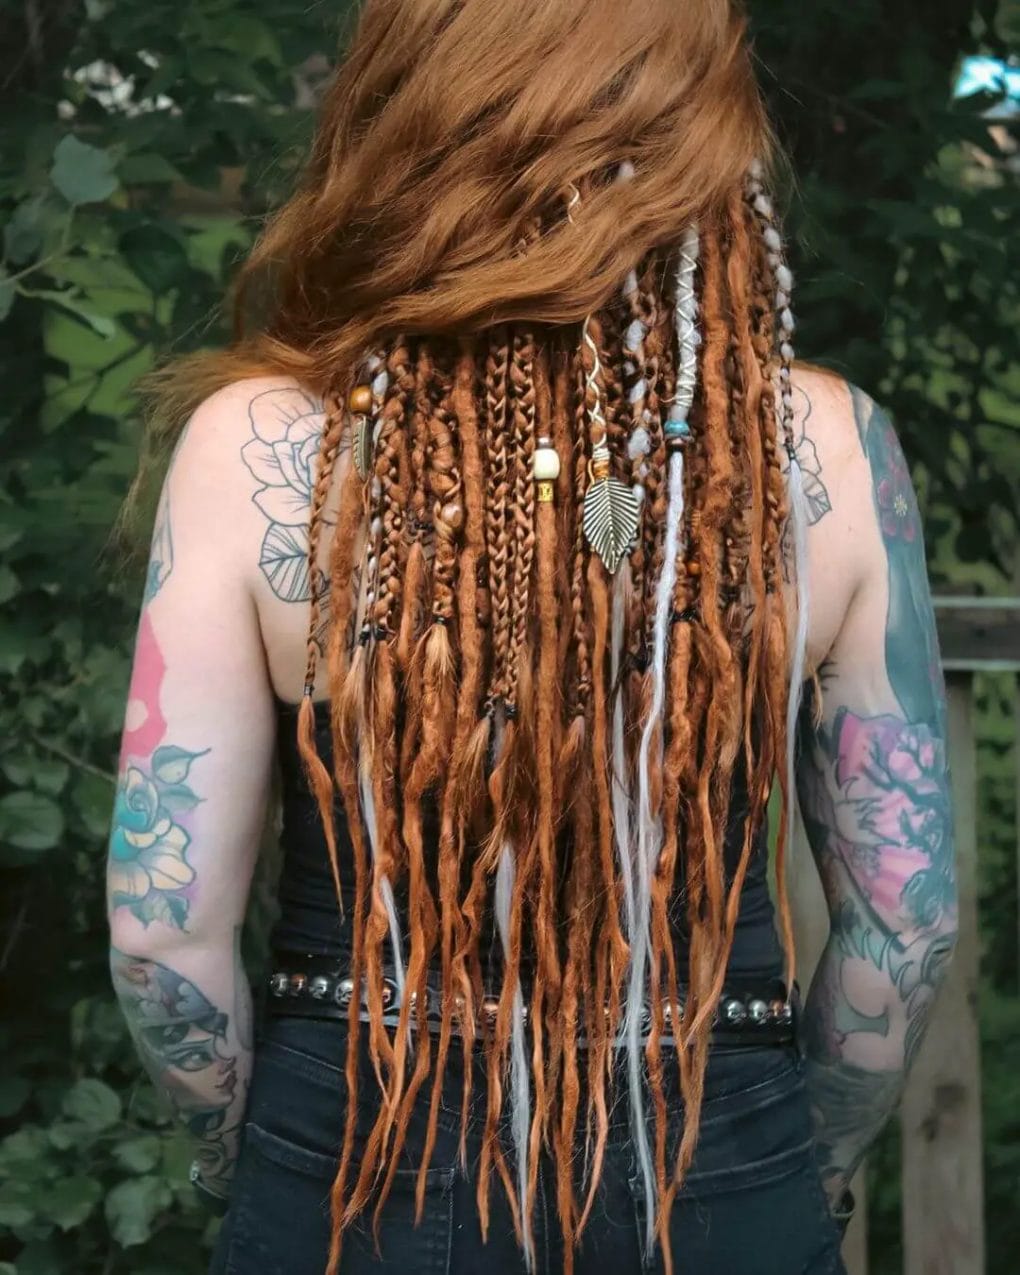 Fiery red dreadlocks styled in a peek-a-boo manner and adorned with charms, beads, and threads.